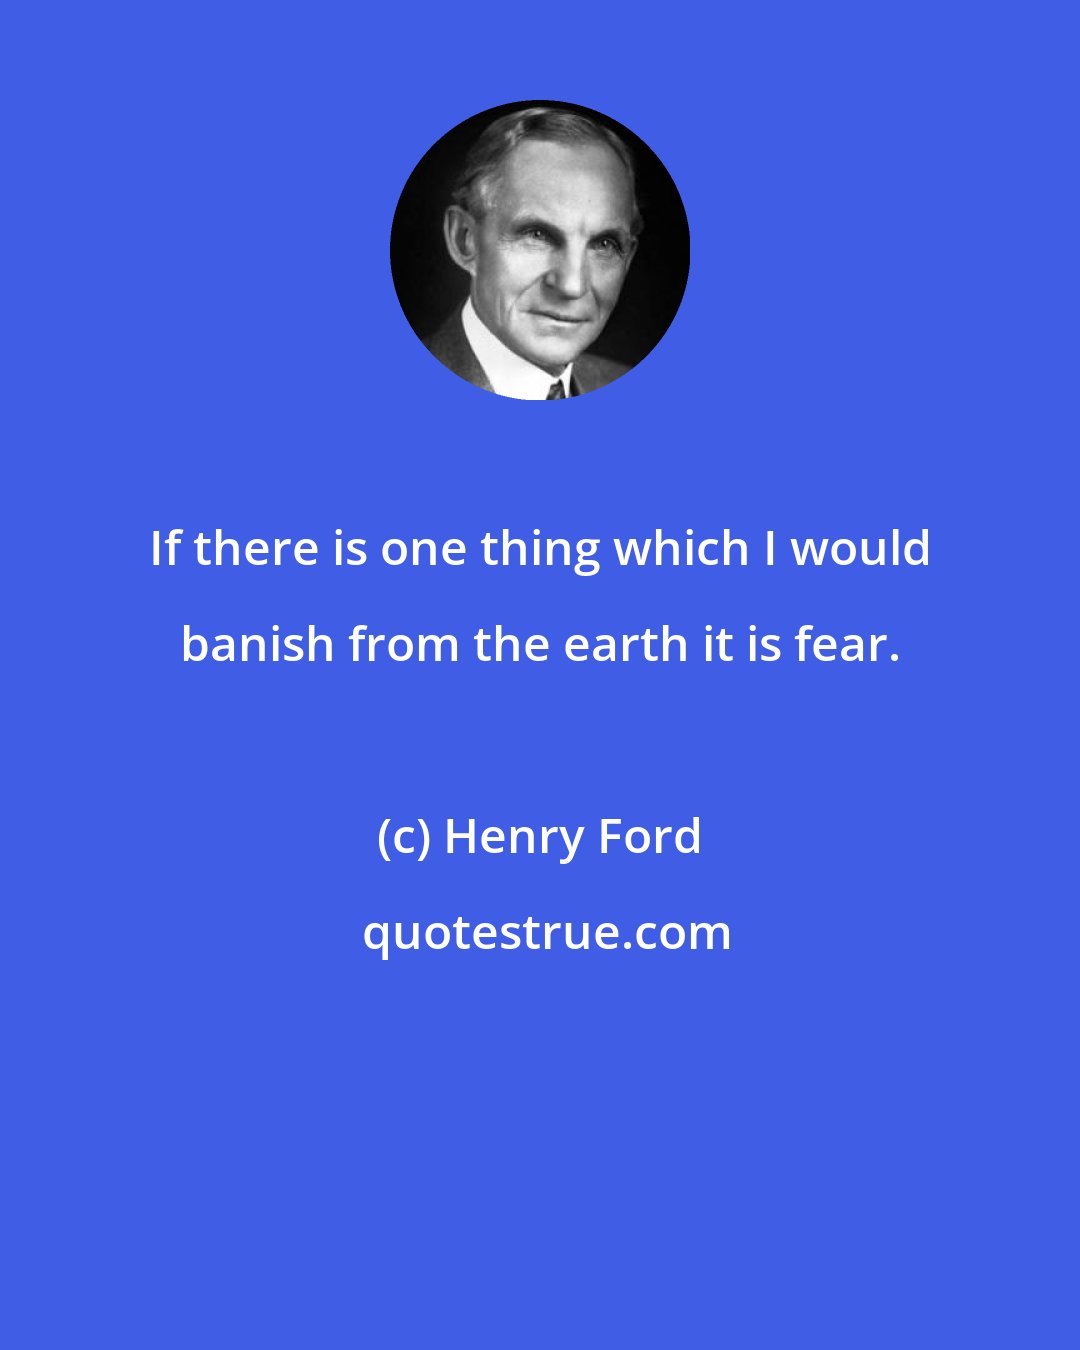 Henry Ford: If there is one thing which I would banish from the earth it is fear.